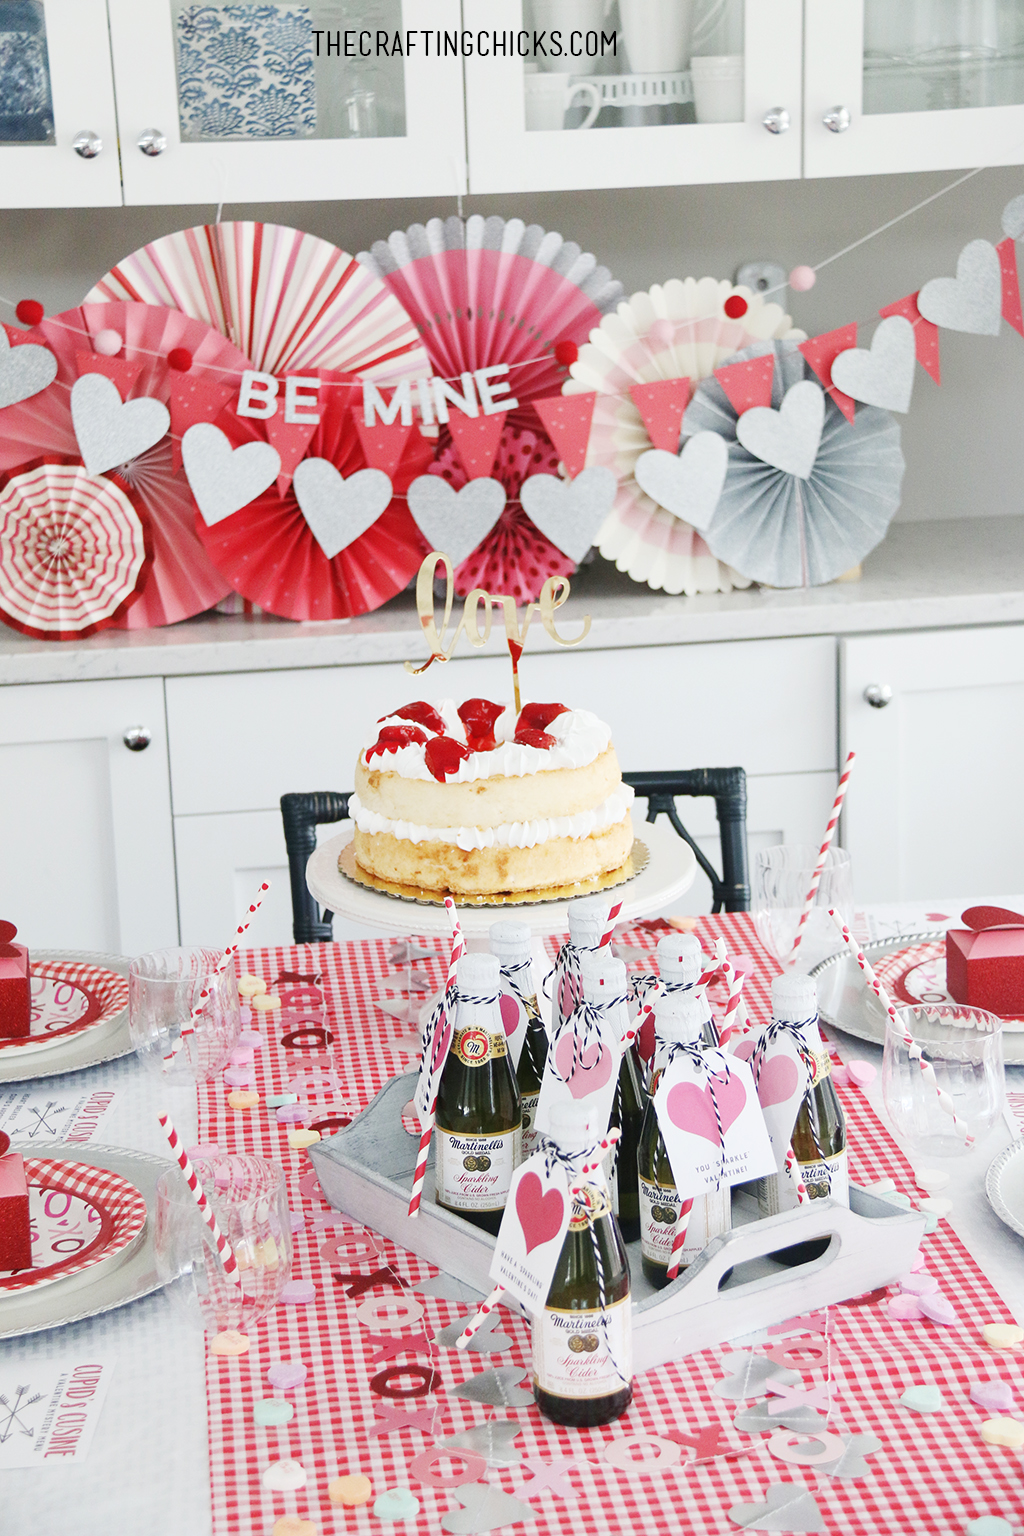 Valentine's Day Family Dinner Decorations - The Crafting Chicks